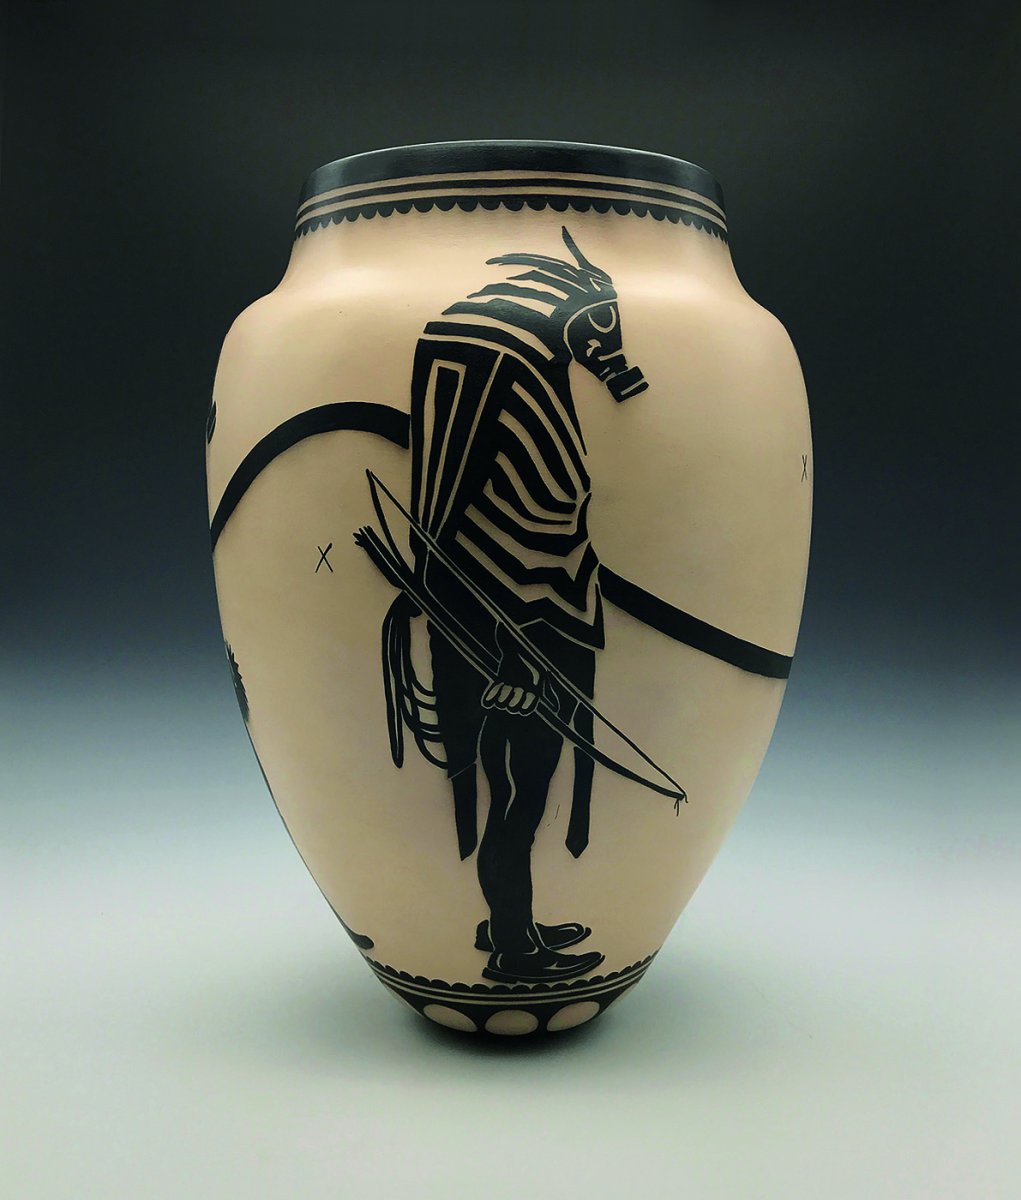 Storage jar with a Venutian soldier wearing a gas mask engraved on the piece.